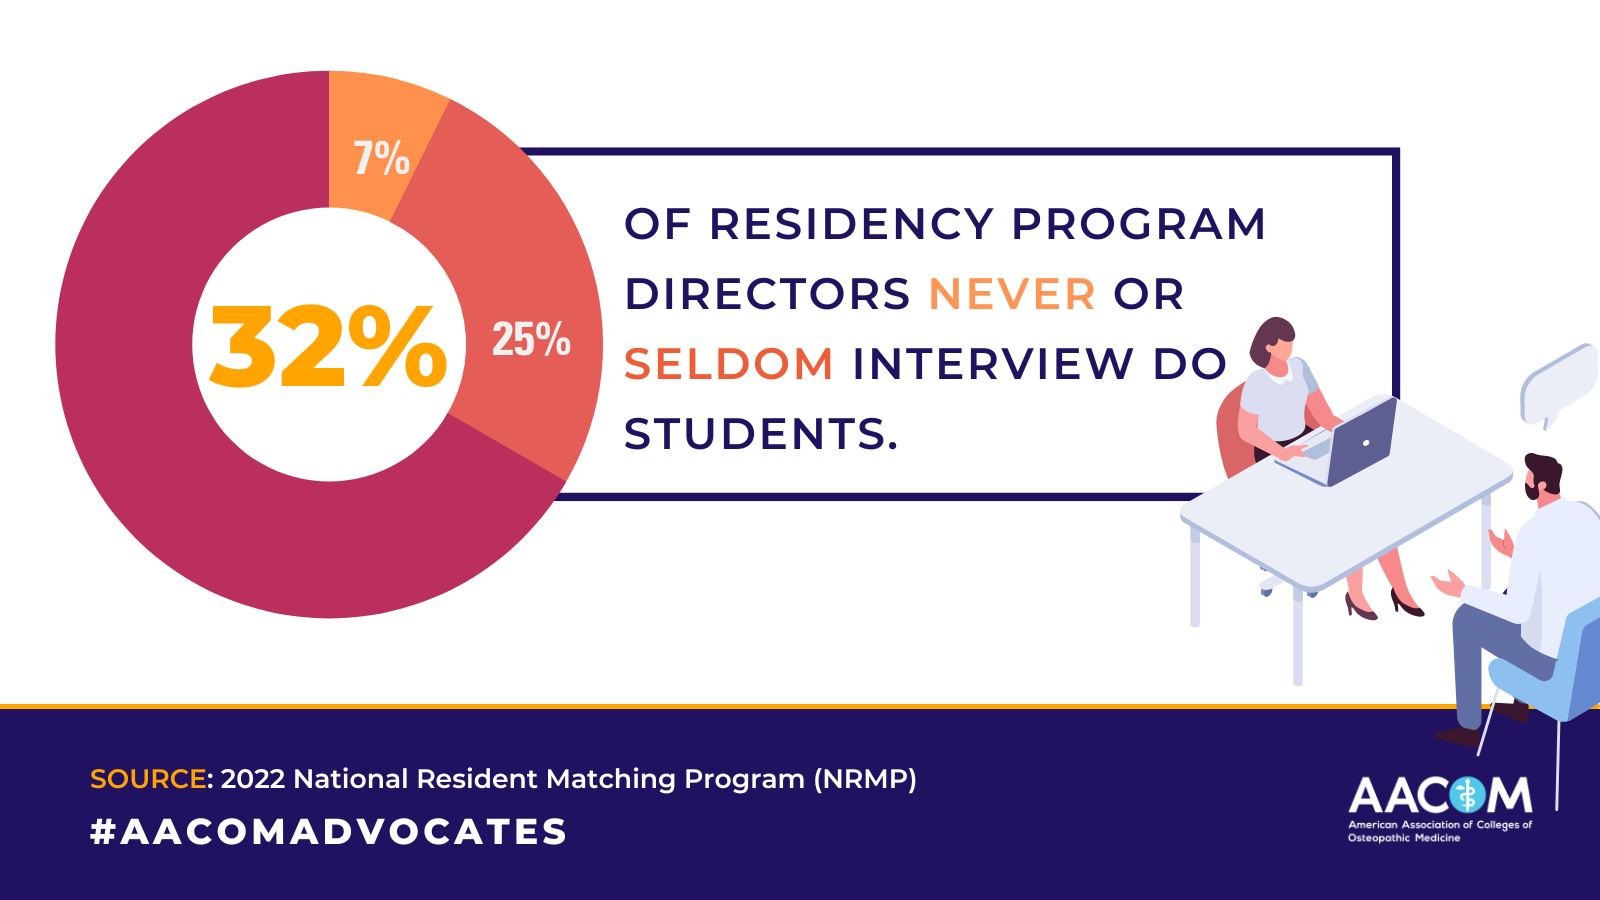 32% of residency program directors never or seldom interview DO students.